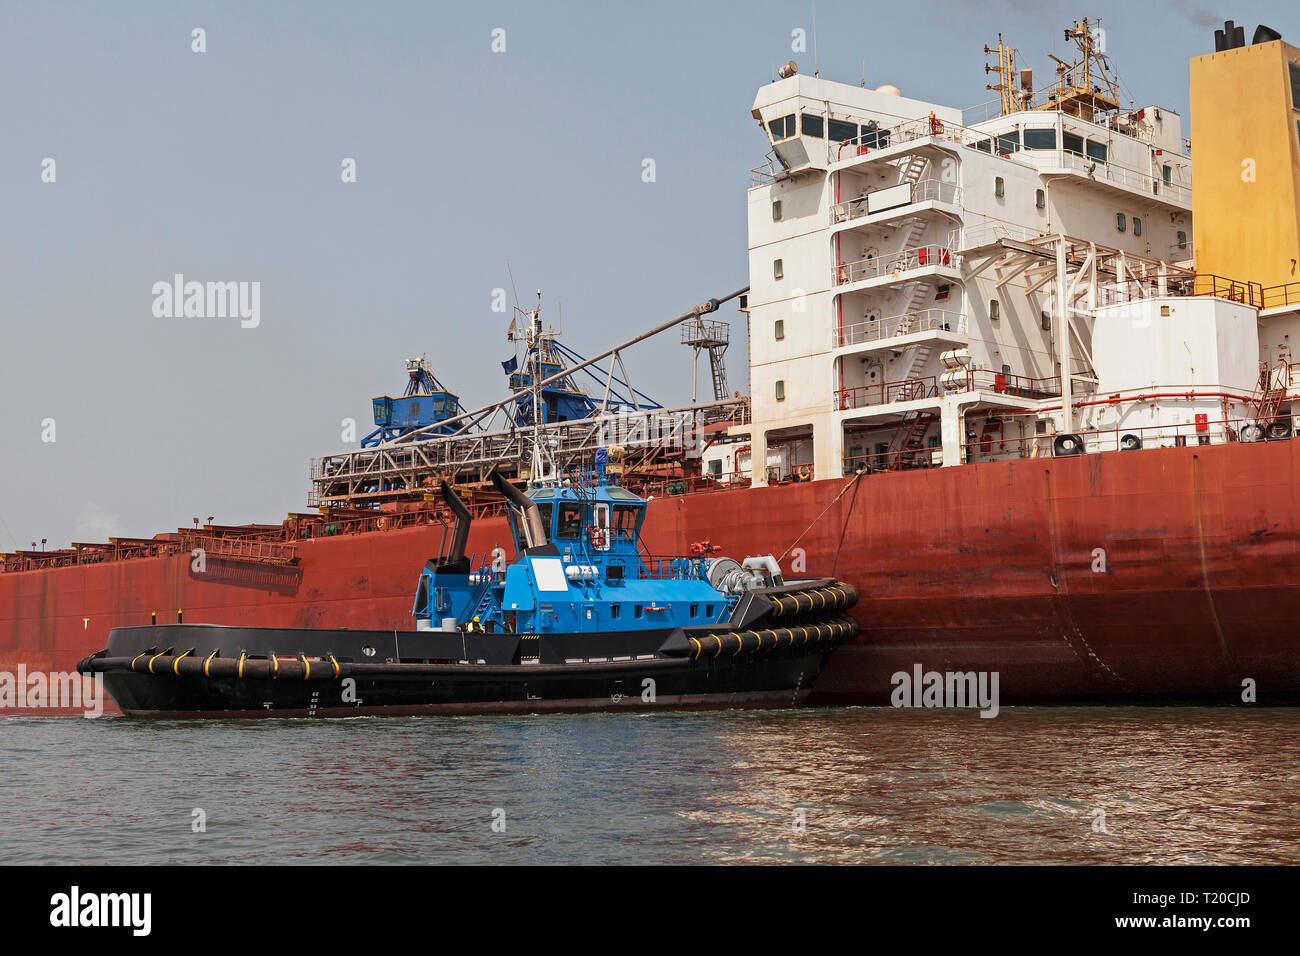 Port operations for managing and transporting iron ore.Tug manoeuvring and turning transhipment vessel before docking and loading up ore at jetty Stock Photo